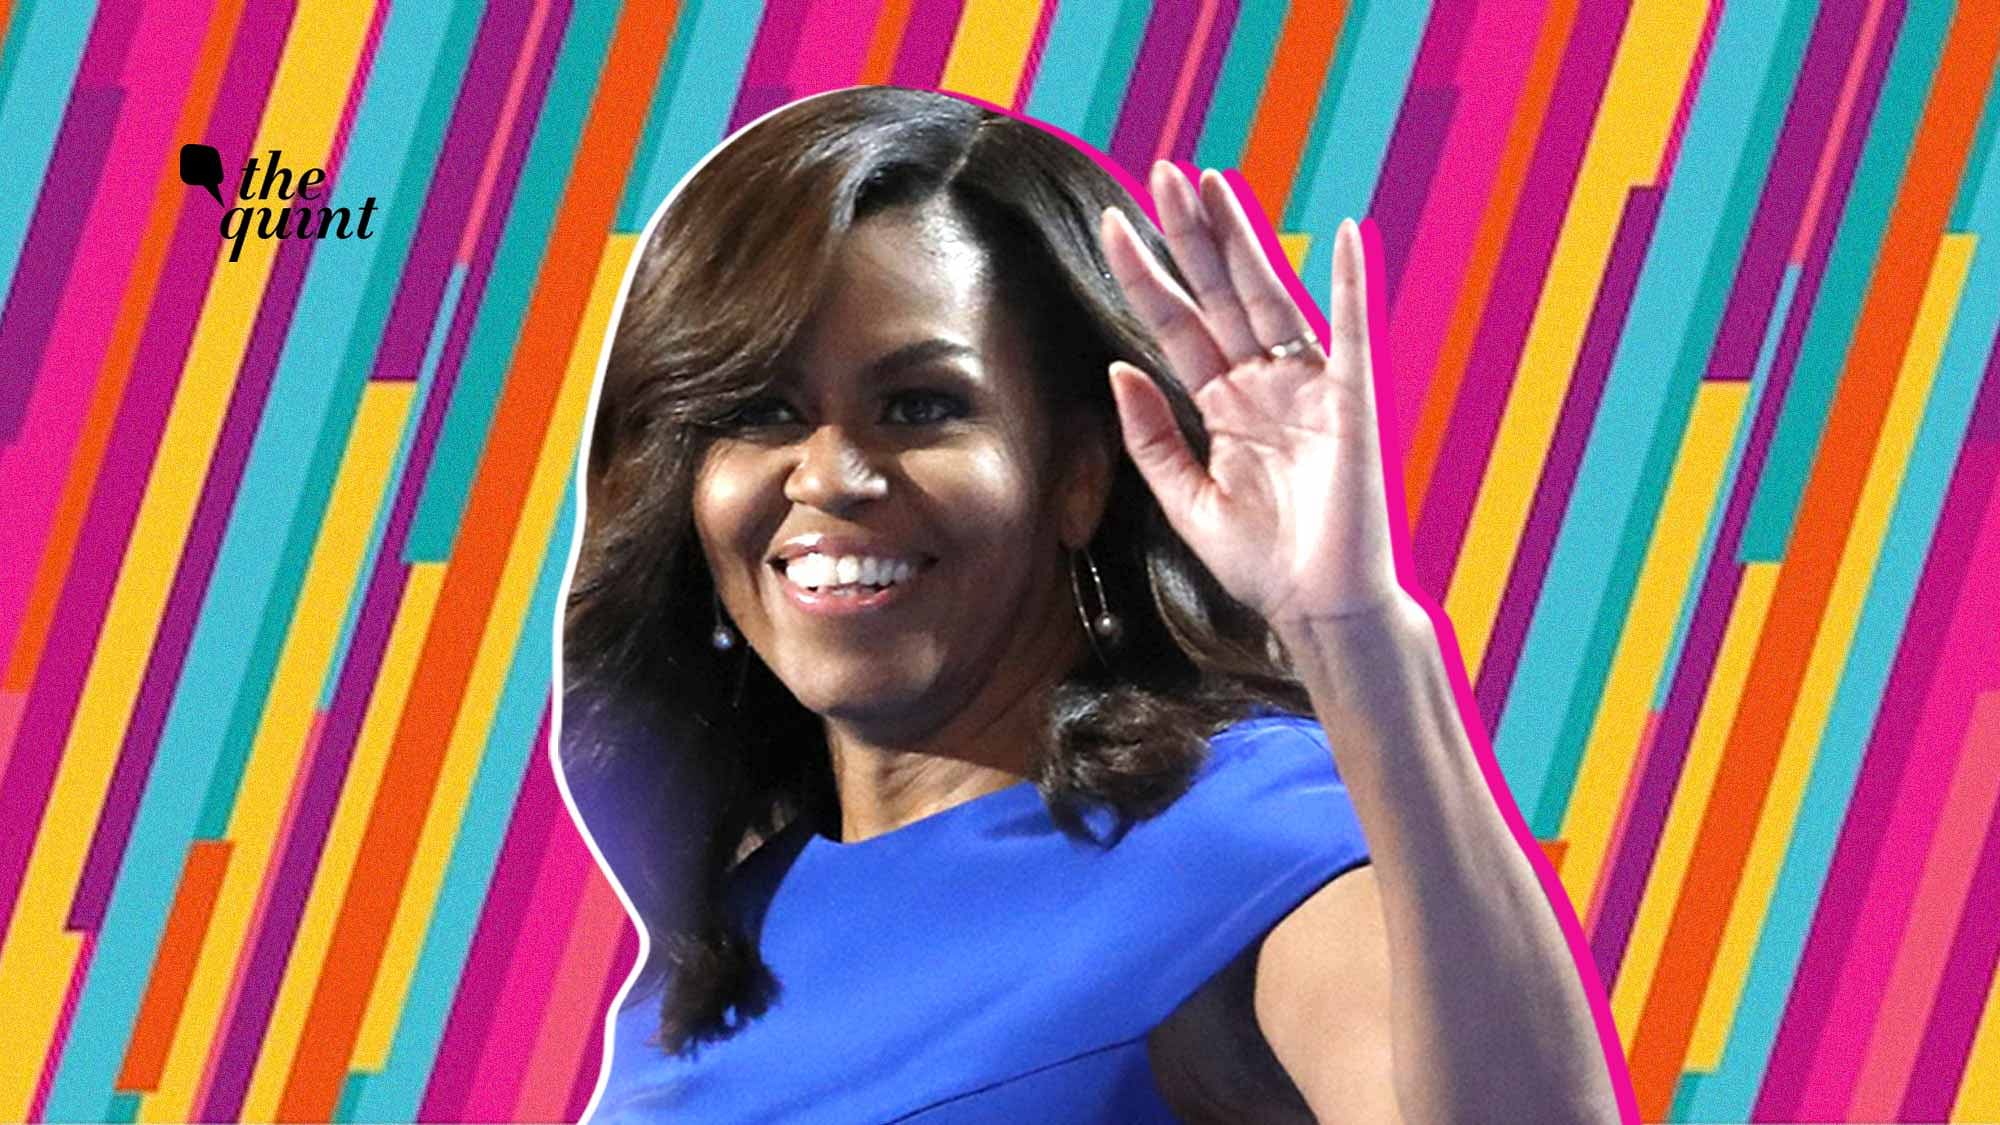 On Michelle Obama’s birthday, let’s take a look at what one of the most <a href="https://time.com/collection/100-most-influential-people-2019/5567670/michelle-obama/">influential women</a> of our times has been up to in recent years.